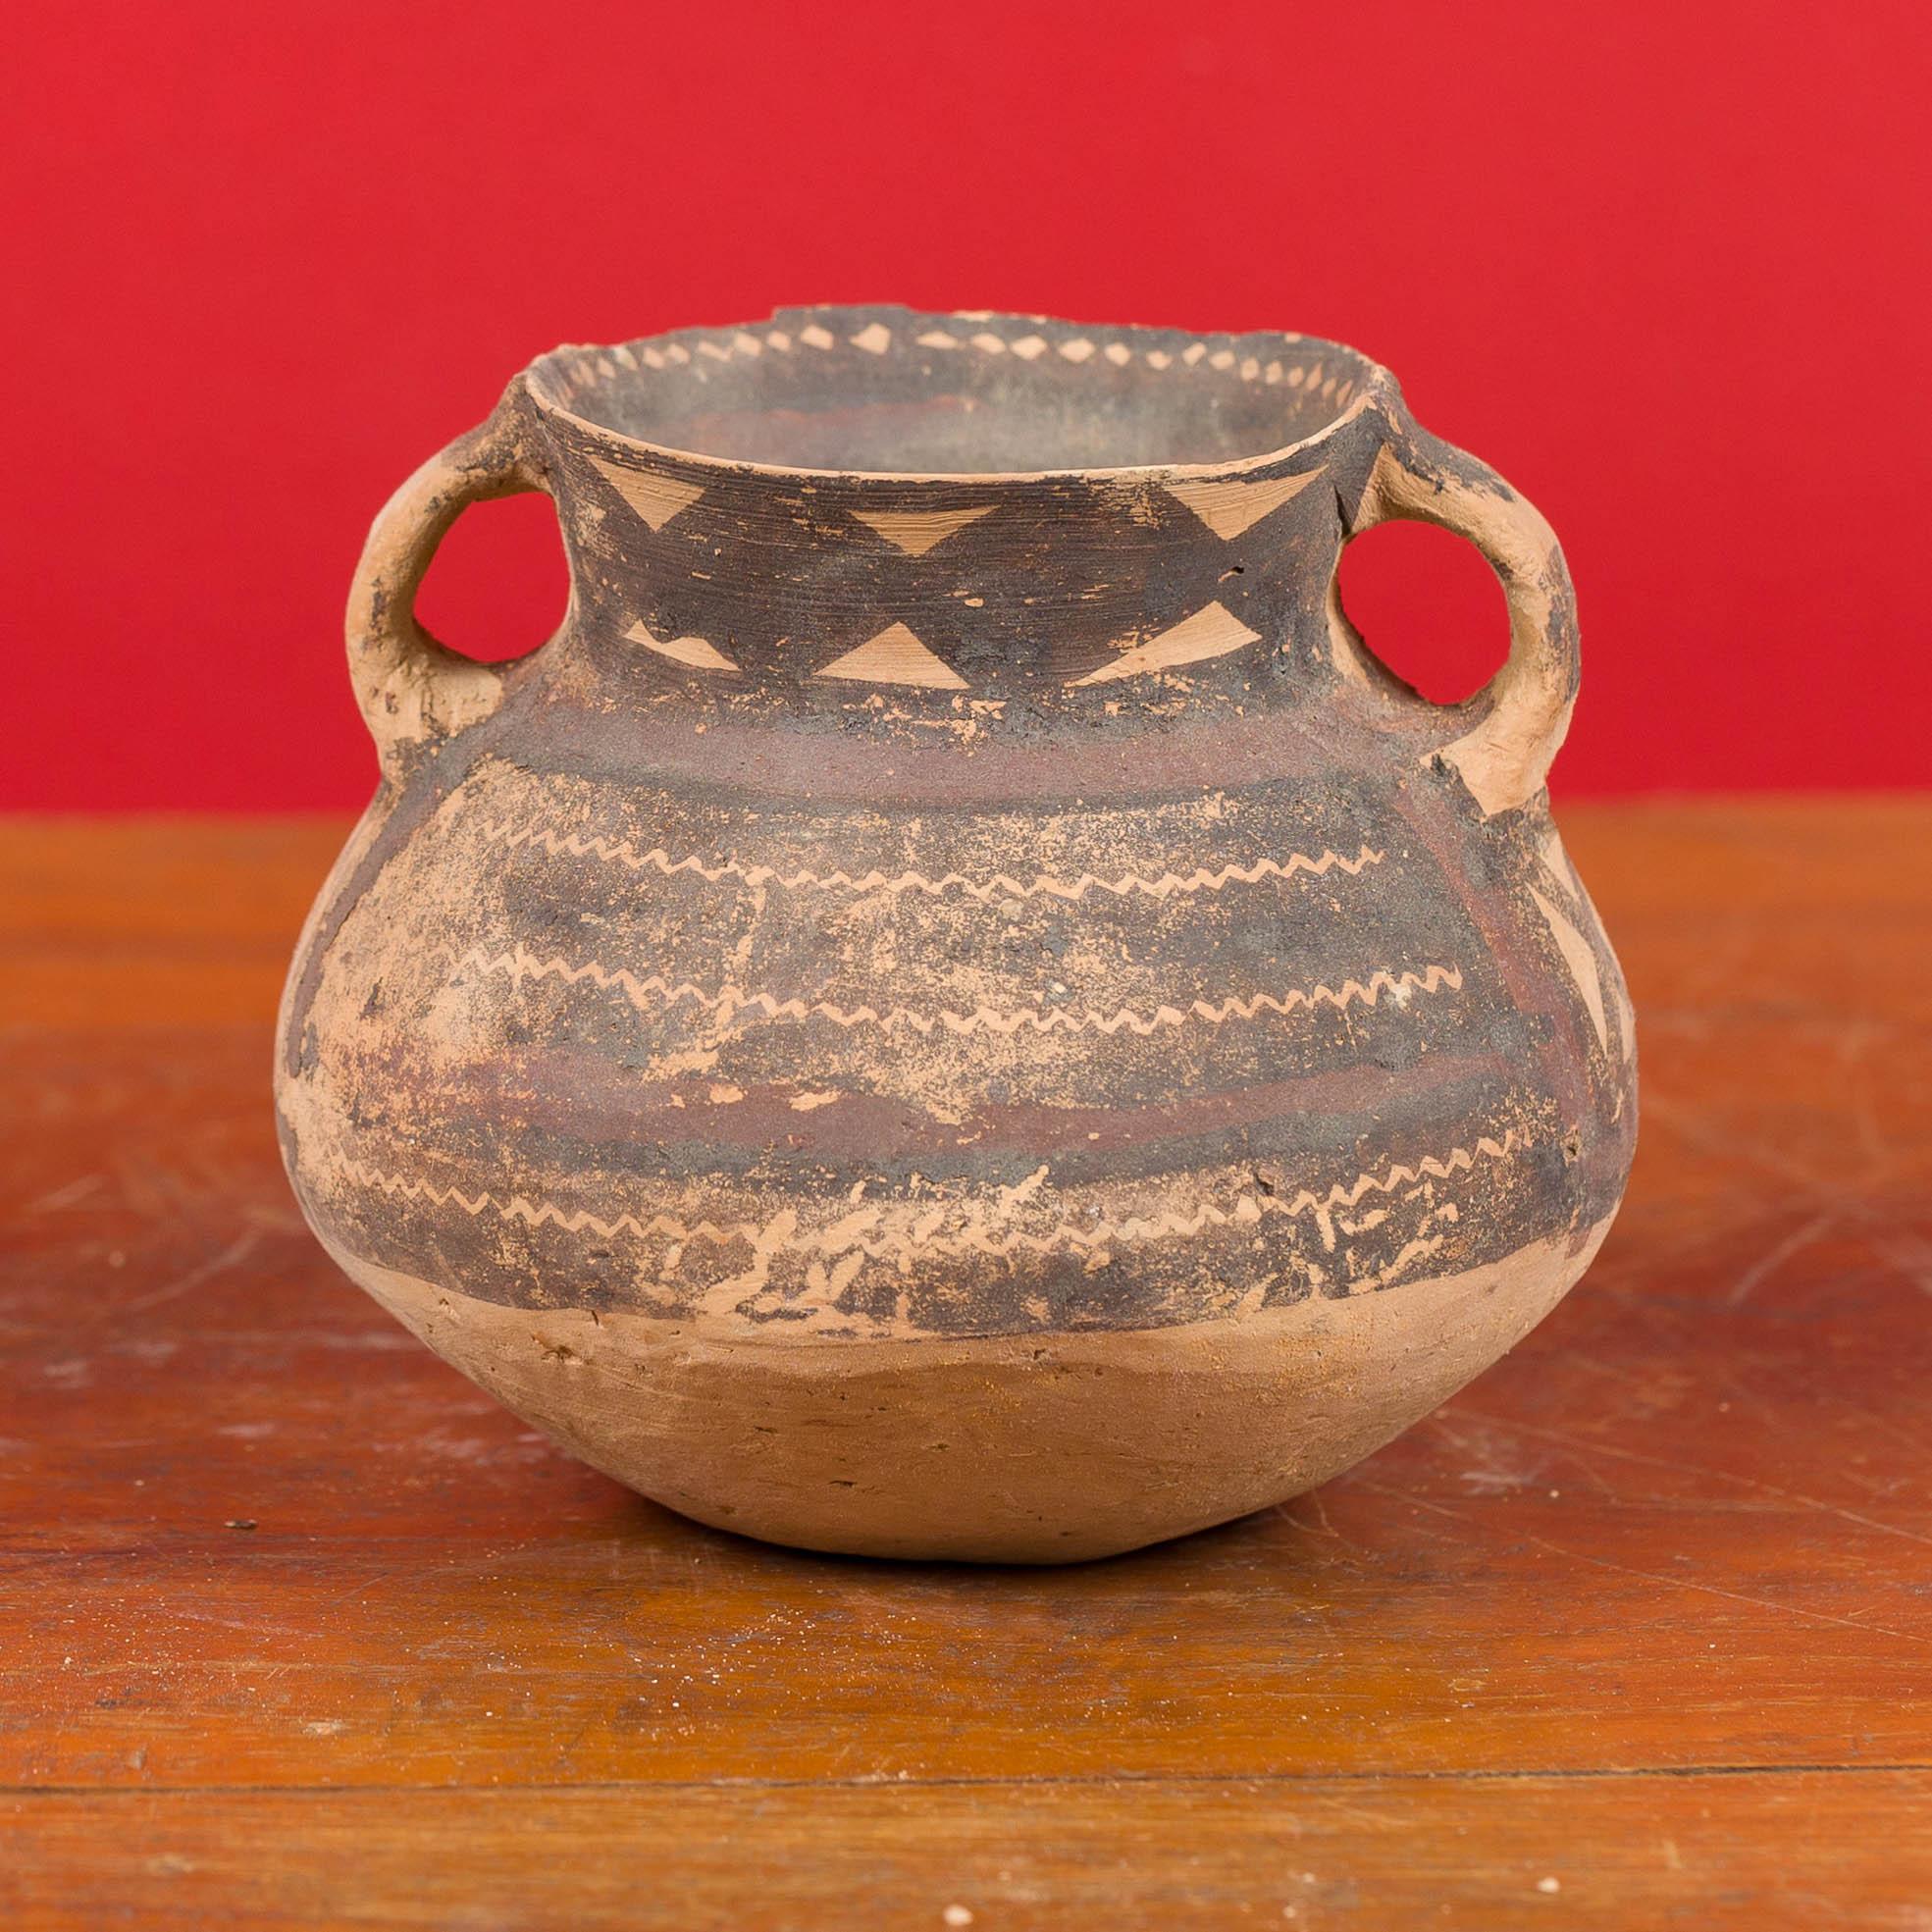 A Neolithic Chinese terracotta pottery from 4000-3000 BC, with lateral handles and brown painted geometric décor. Born in China during the Neolithic period, this pitcher attracts our attention with its nice patina, simple lines and geometric motifs.